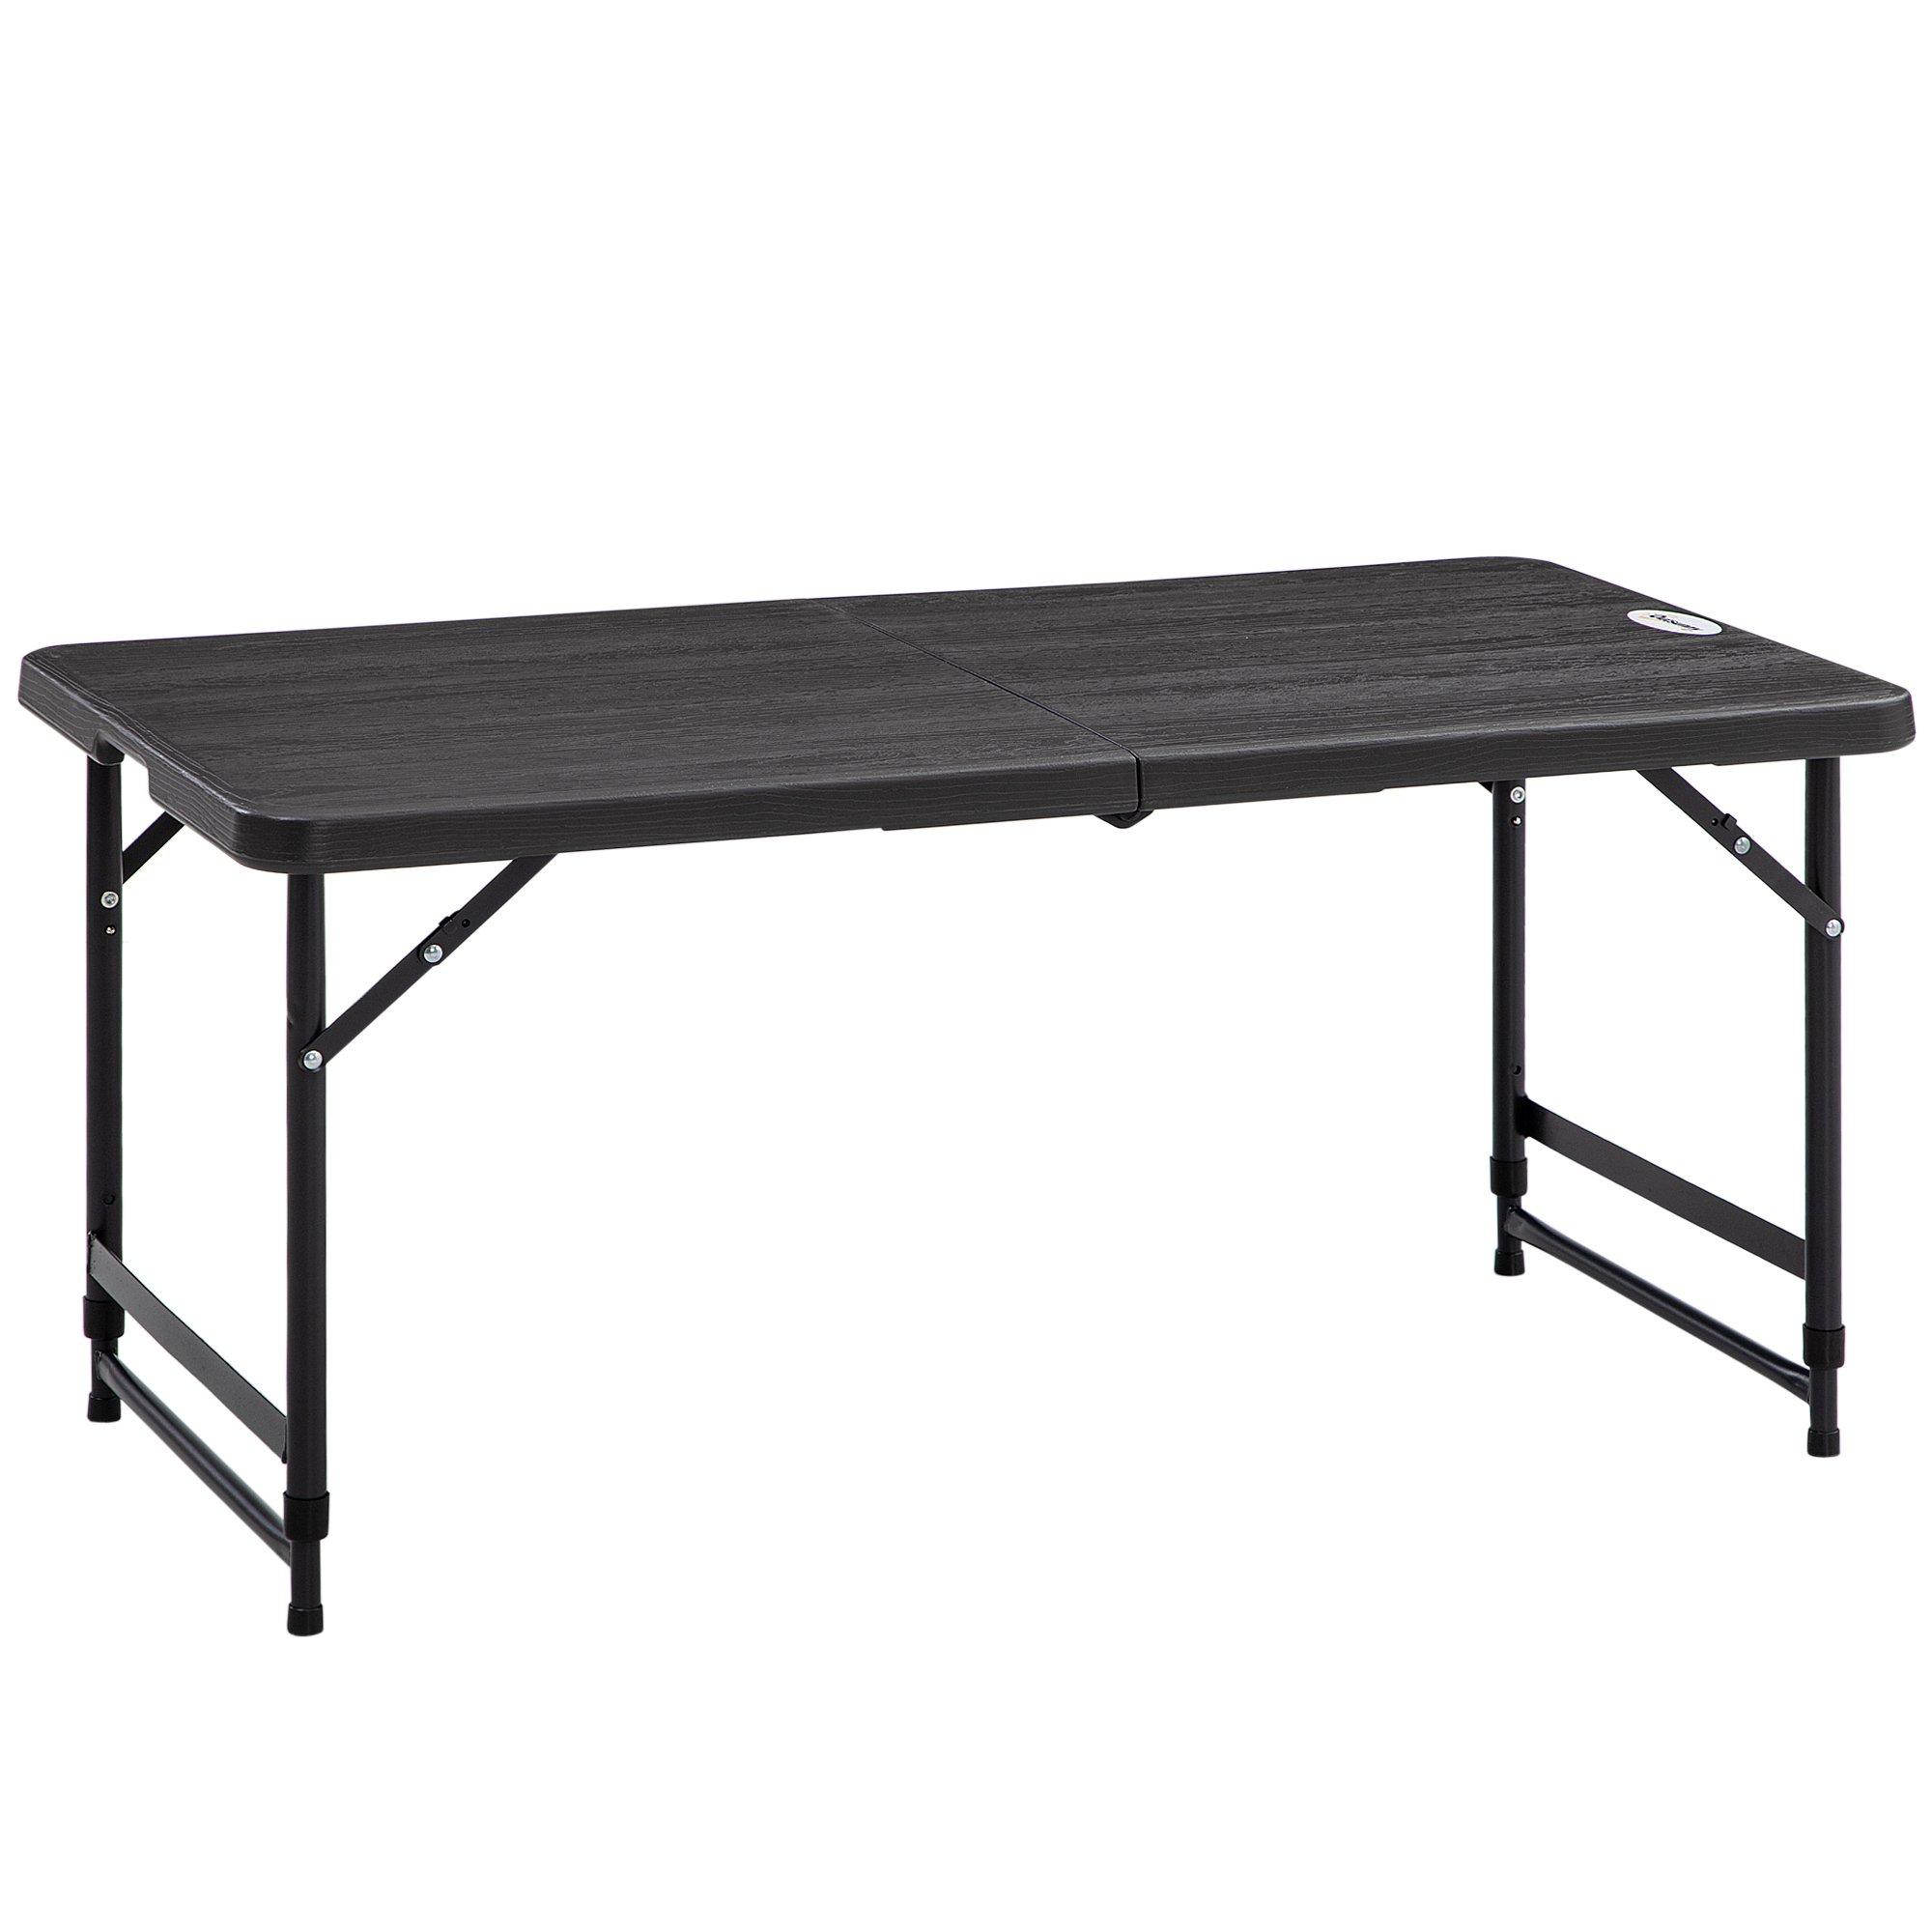 Foldable Outdoor Dining Table for 4, Height Adjustable Steel Legs